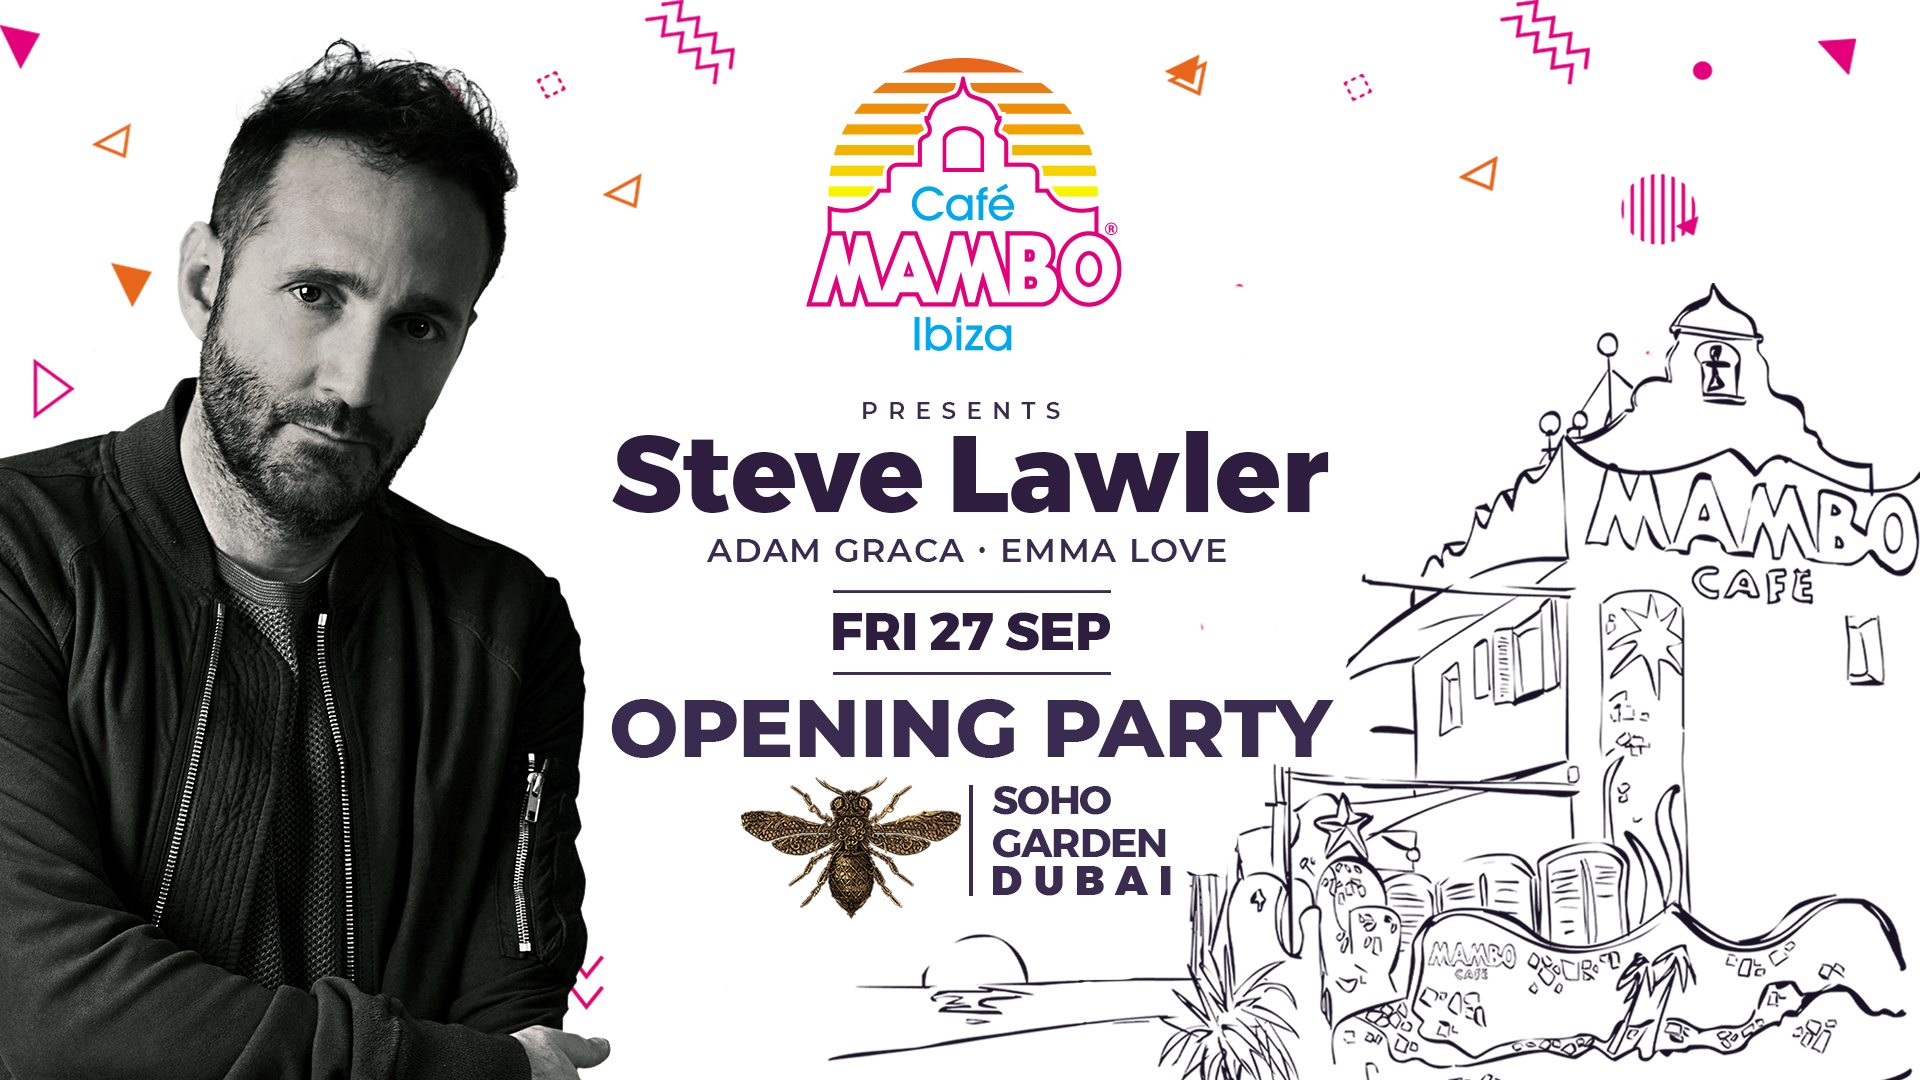 Cafe Mambo Season Opening with Steve Lawler - Coming Soon in UAE